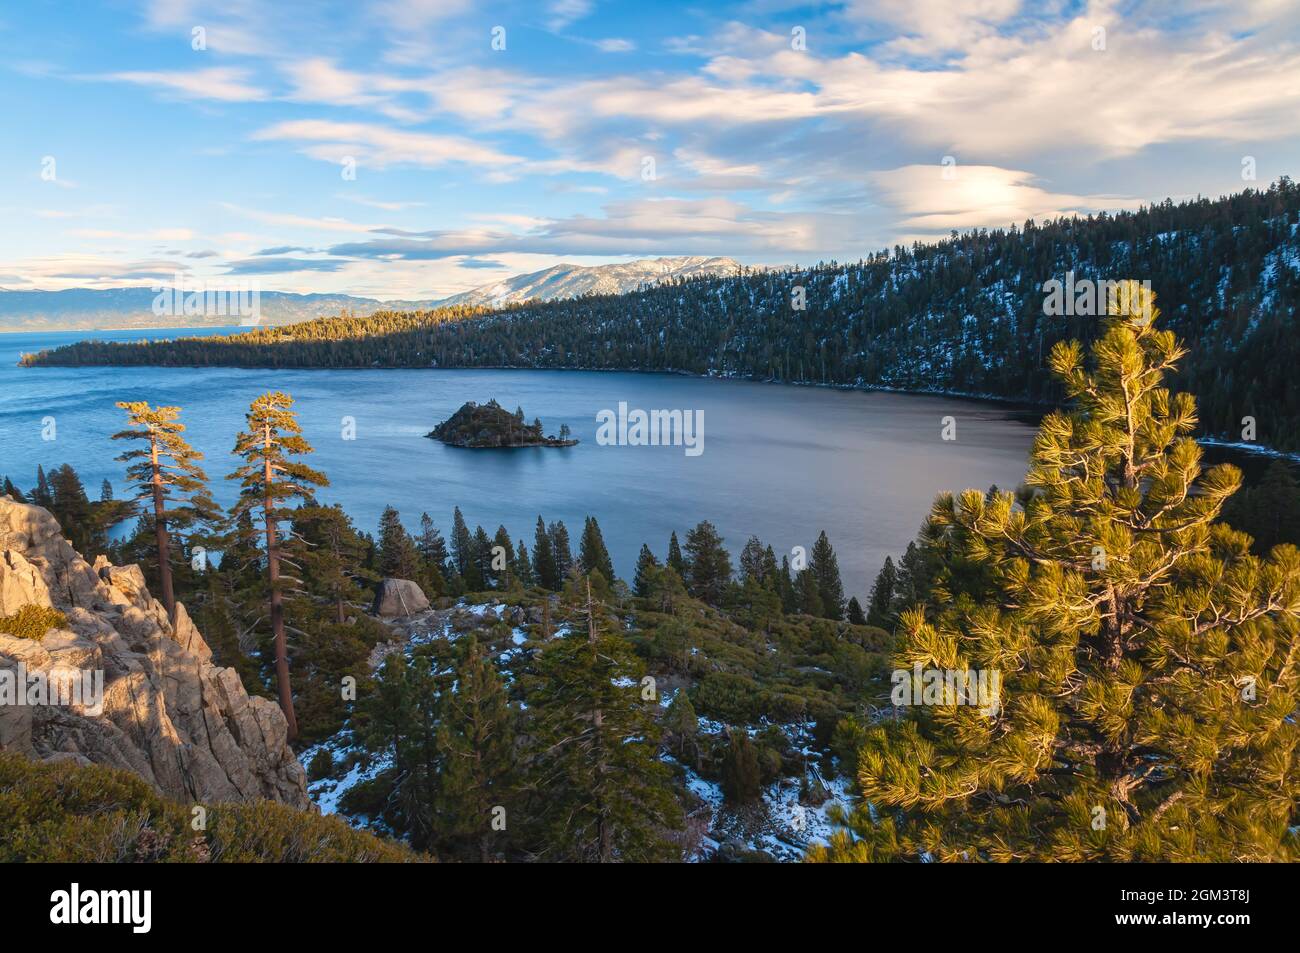 Scenic view of the Lake Tahoe's Emerald Bay, with Fannette Island, during a dry winter season, California, USA. Stock Photo